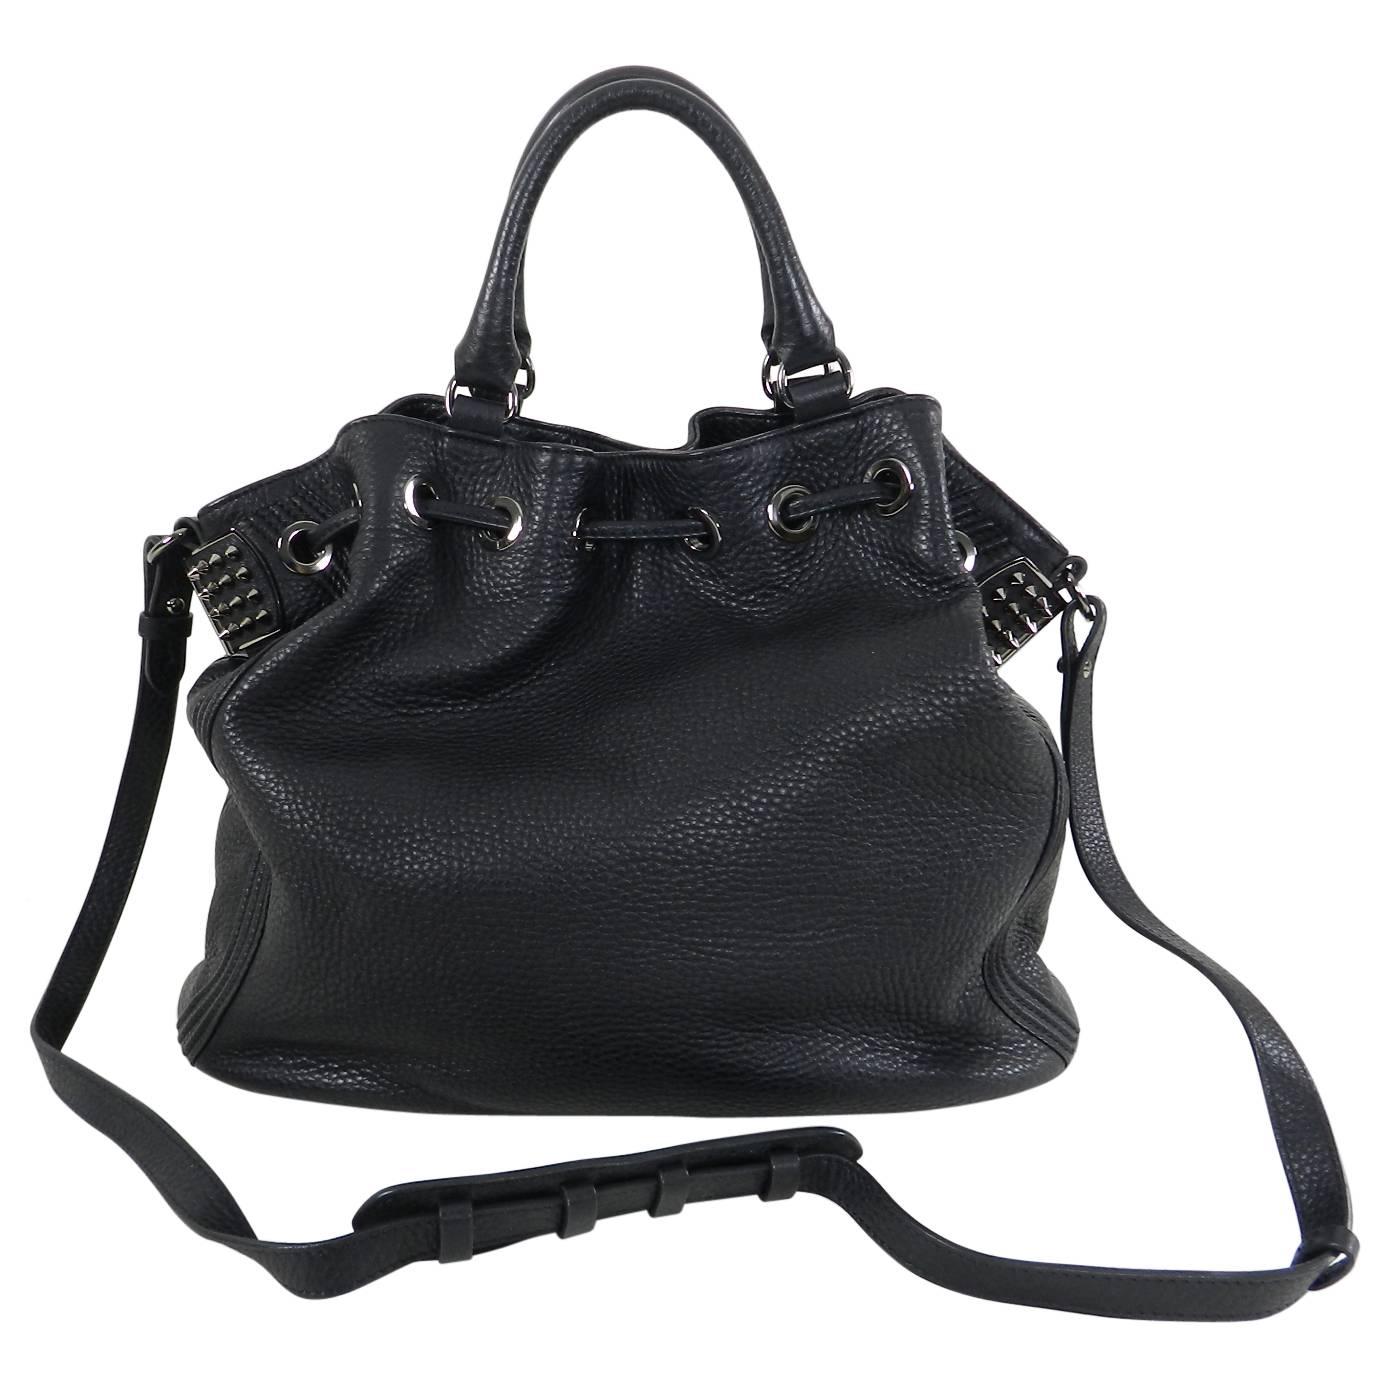 Christian Louboutin Black Leather Drawstring Studded Bag. Double handles, long shoulder strap, magnetic interior closure. Handle drop 5.5”. Shoulder strap drop 17.5”. Body of bag measures about 17.5”x 12.5”x 7.25”. Excellent pre-owned condition.